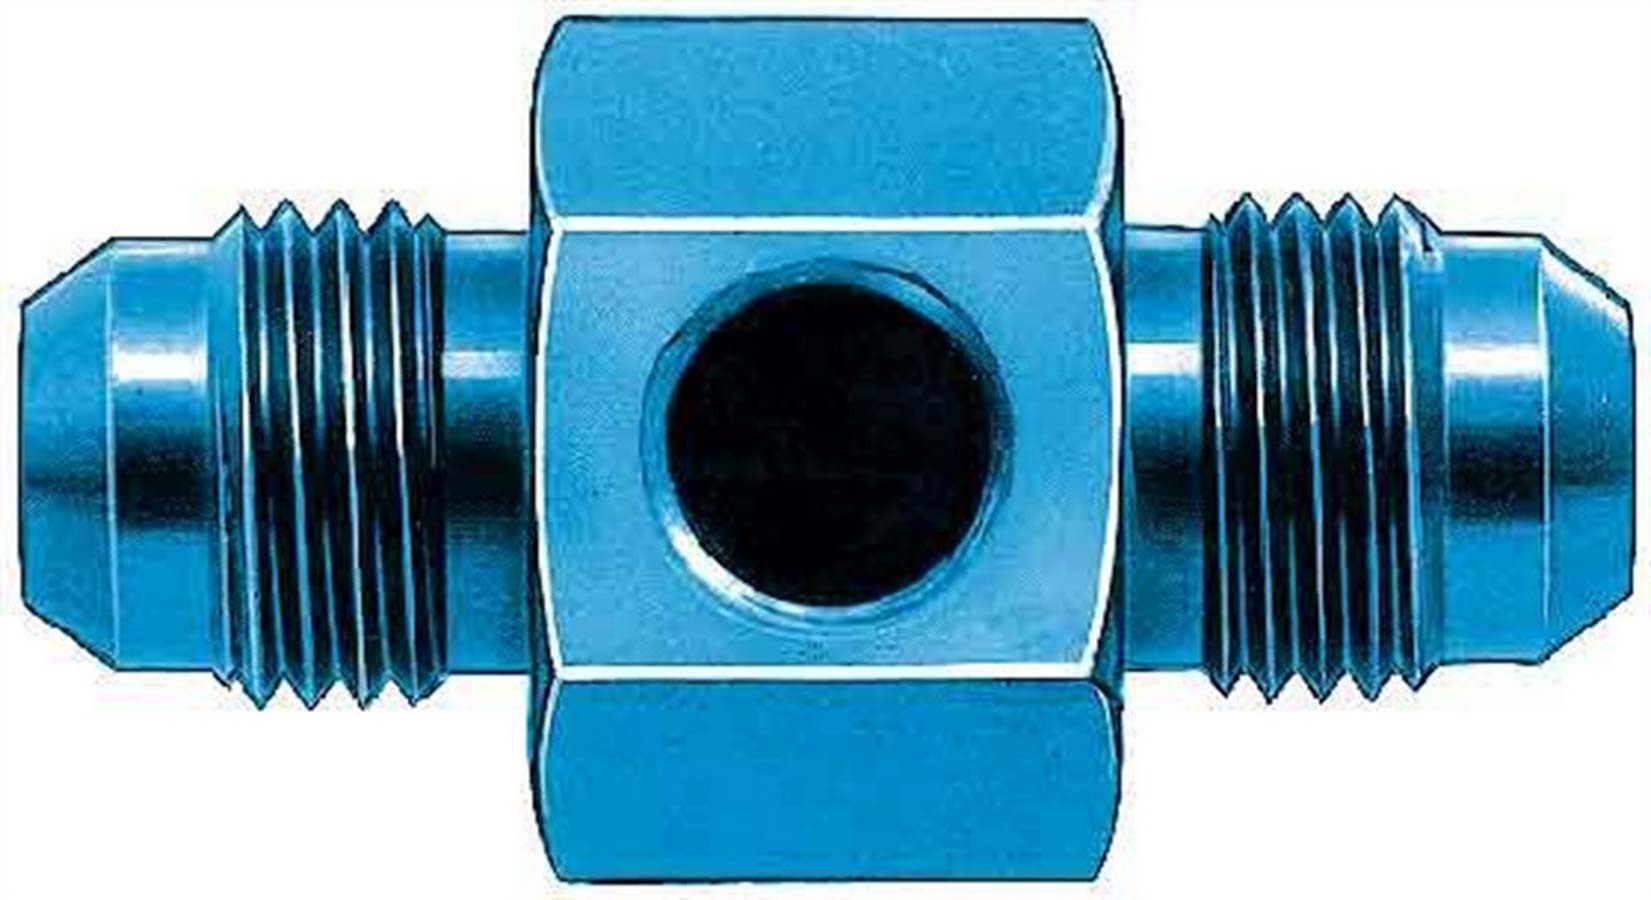 Aeroquip FCM2184 Fitting, Gauge Adapter, Straight, 8 AN Male to 8 AN Male, 1/8 in NPT Gauge Port, Aluminum, Blue Anodized, Each